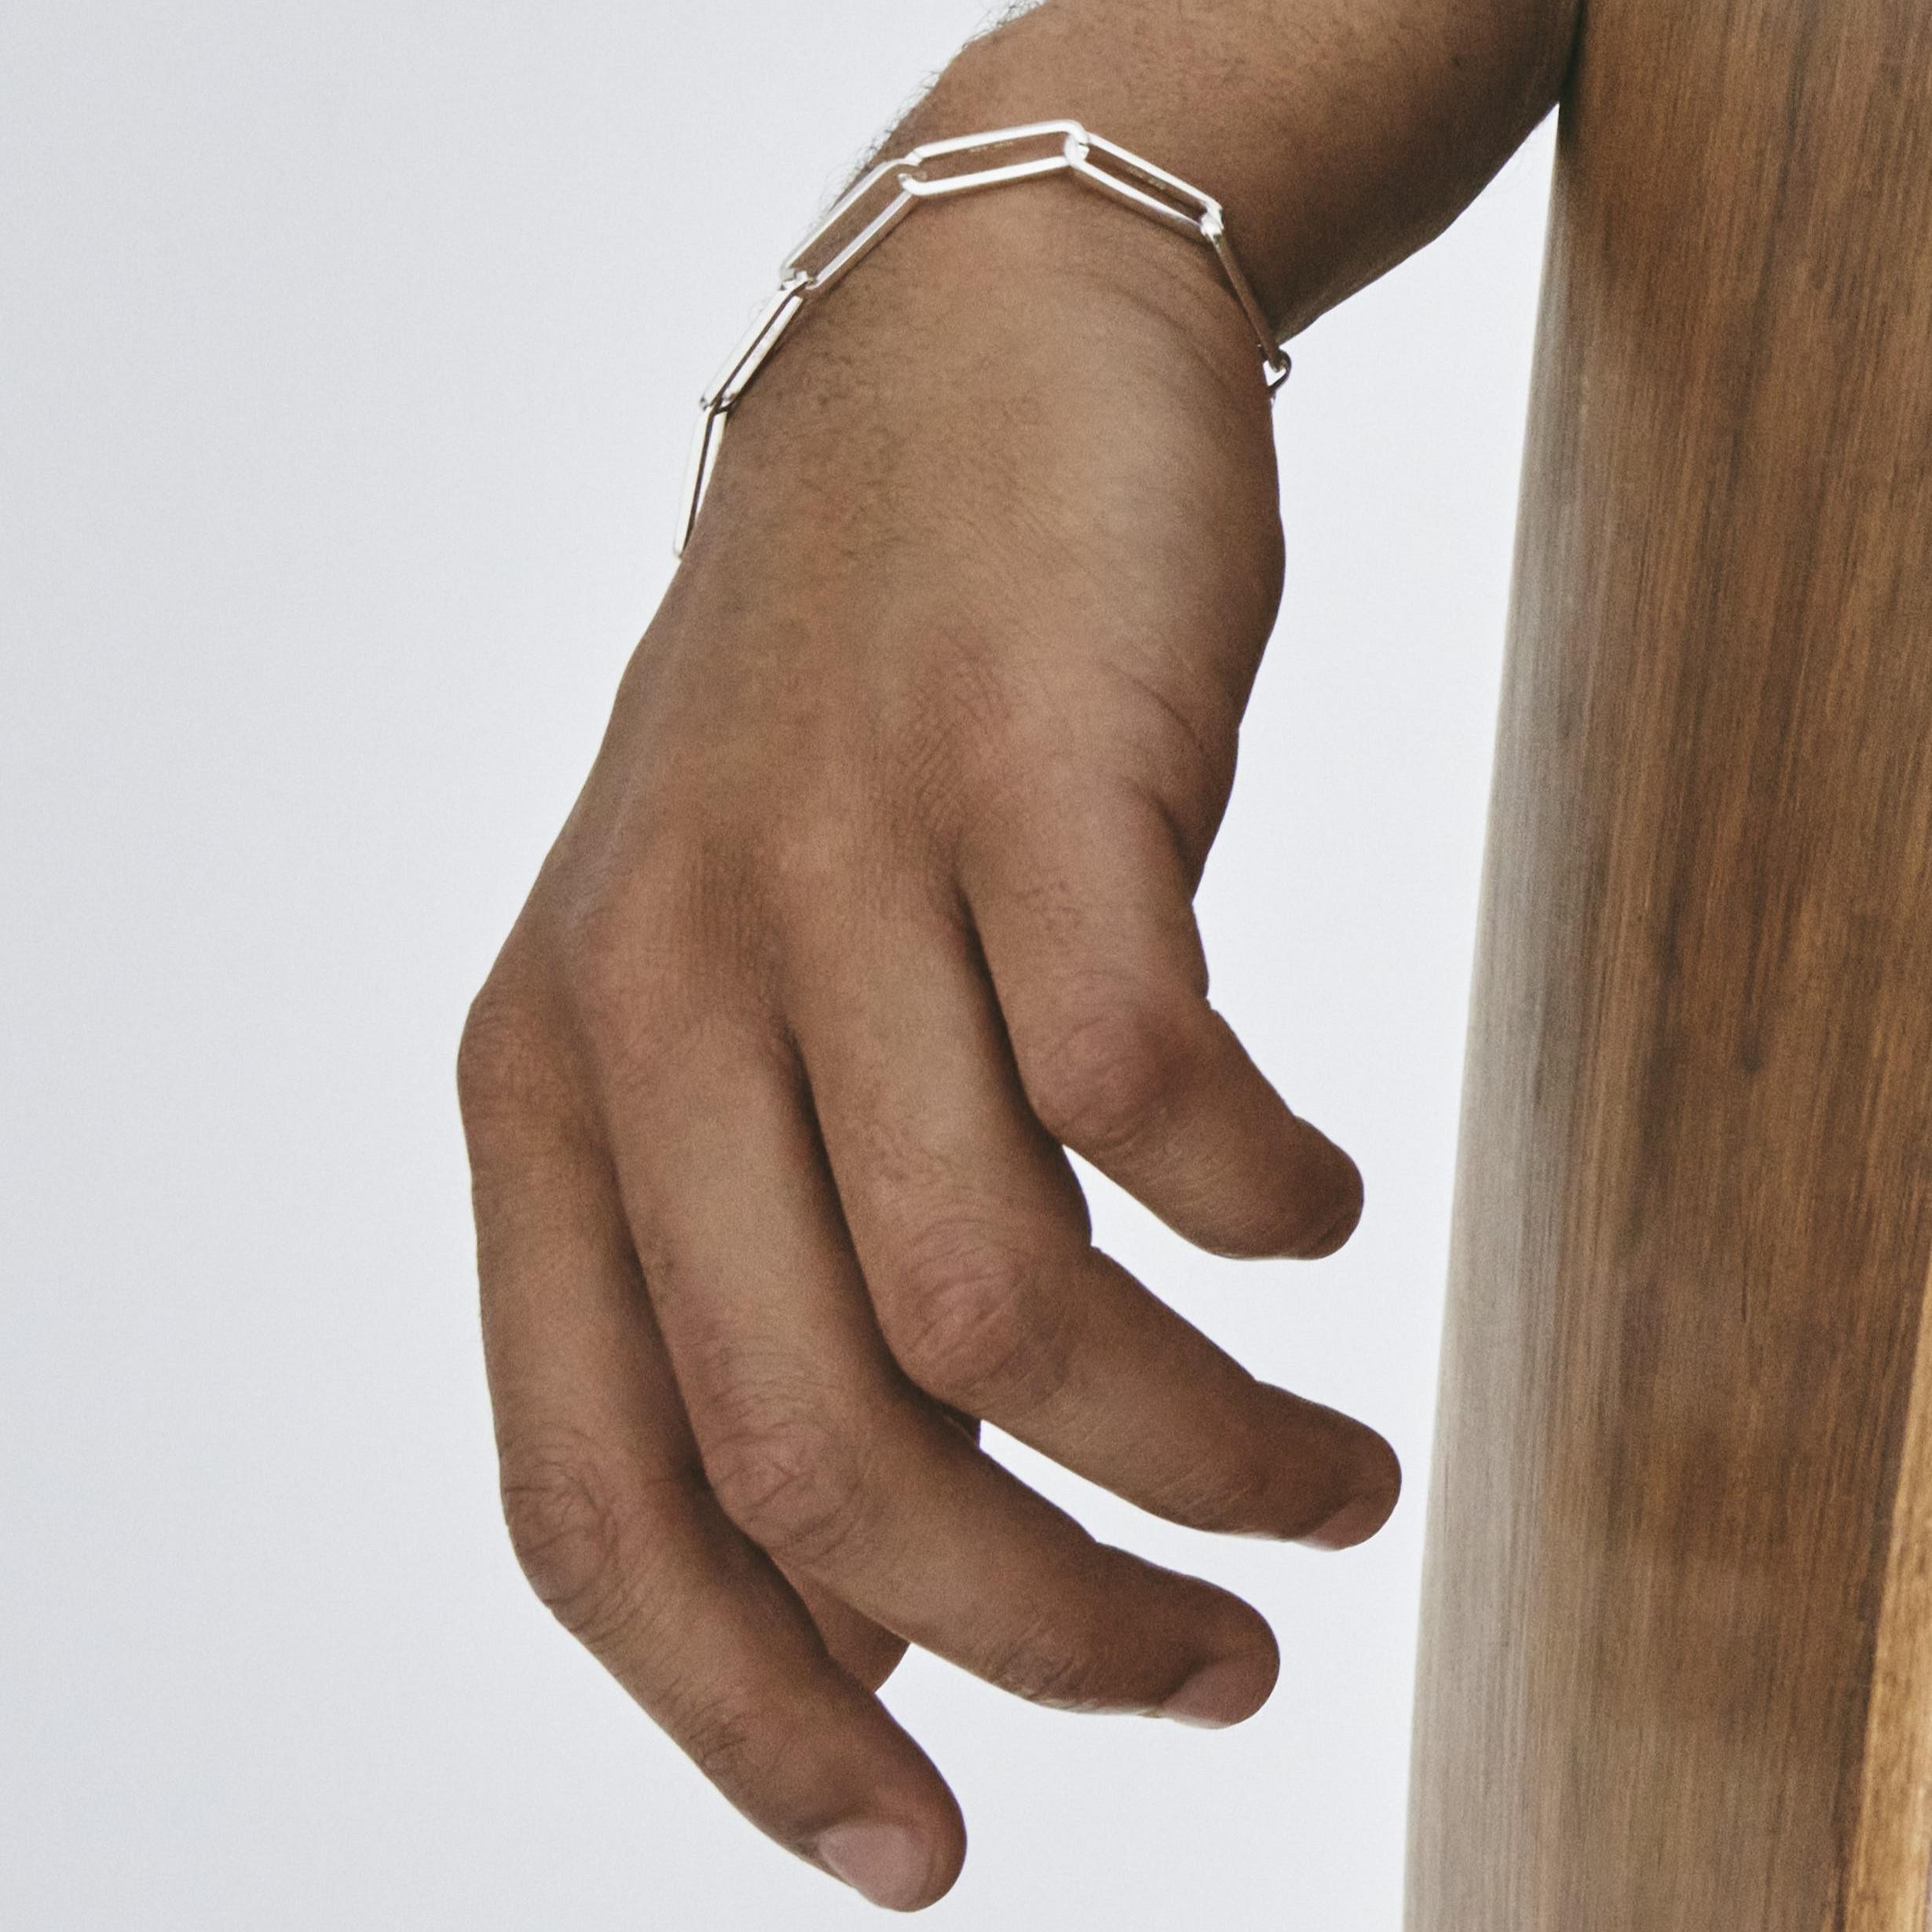 Also available in sterling silver with 1 gold link; 18k gold with 1 silver link, and in large size.

A superb bracelet of links in recycled sterling silver. Inspired by classic Scandinavian design and the ancient art of Japanese wood joinery, each